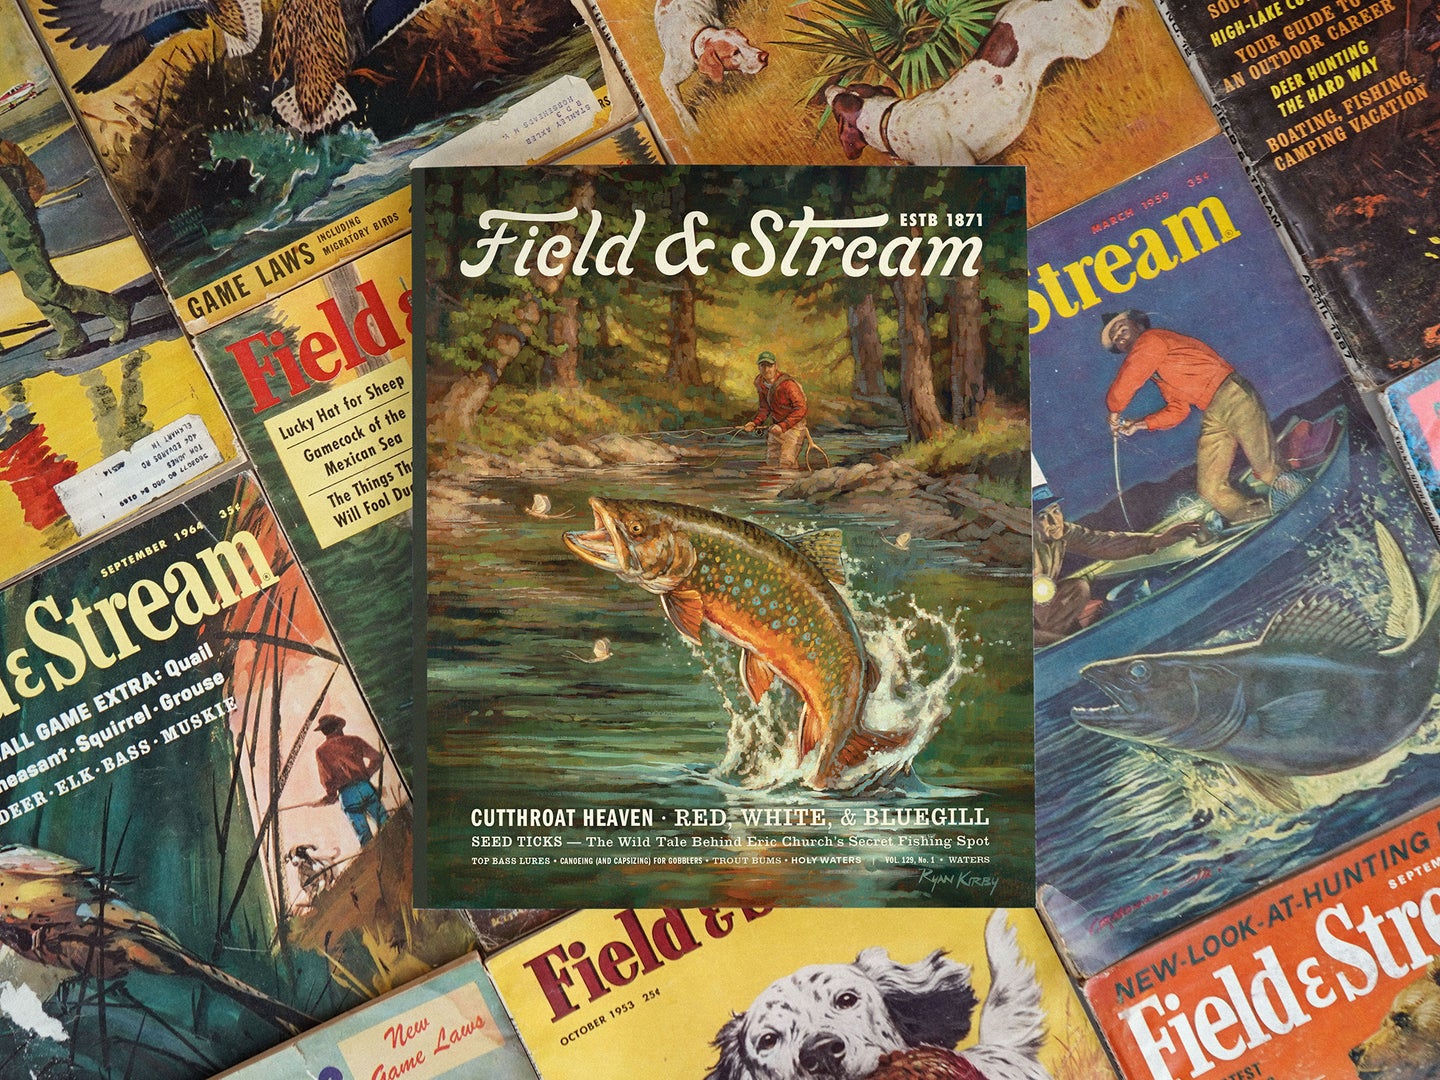 The cover of the first print edition of the new FIeld & Stream Journal